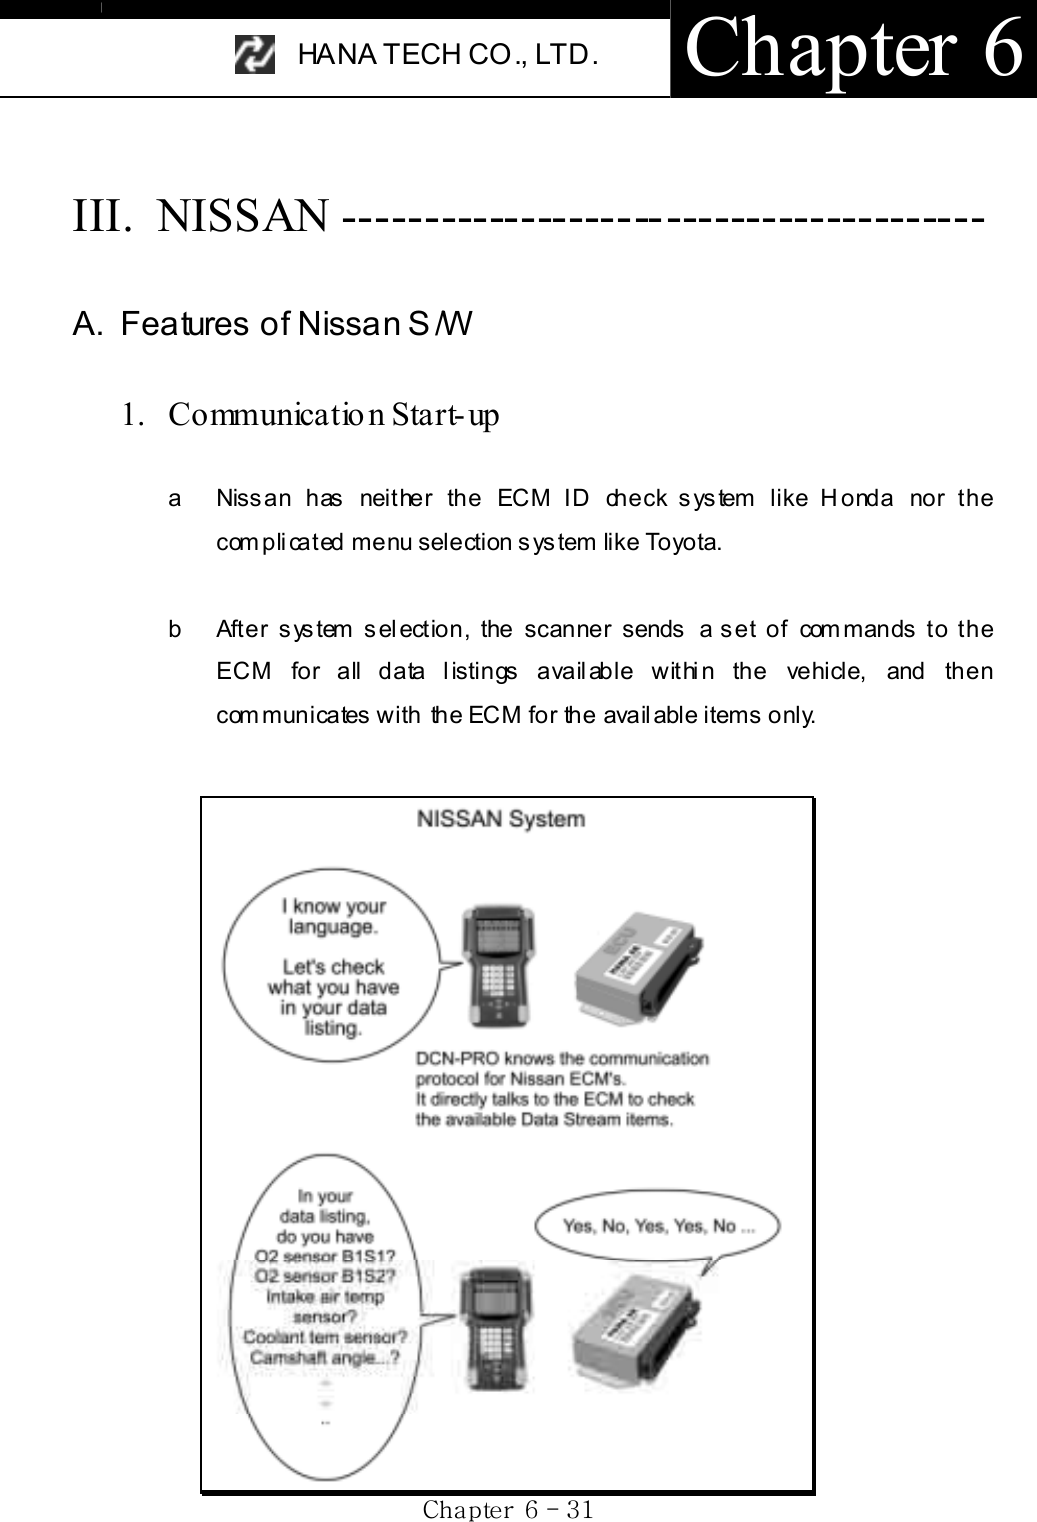 HANA TECH CO., LTD.  Chapter 6 Gj G]G TGZXGIII. NISSAN ---------------------------------------- A.  Features of Nissan S/W 1. Communicatio n Start-up a  Nissan has neither the ECM ID check system like Honda nor the compli cated menu selection system like Toyota. b  After system selection, the scanner sends a set of commands to the ECM  for all data listings available within the vehicle,  and then com municates  with the ECM for the avail able items  only. 